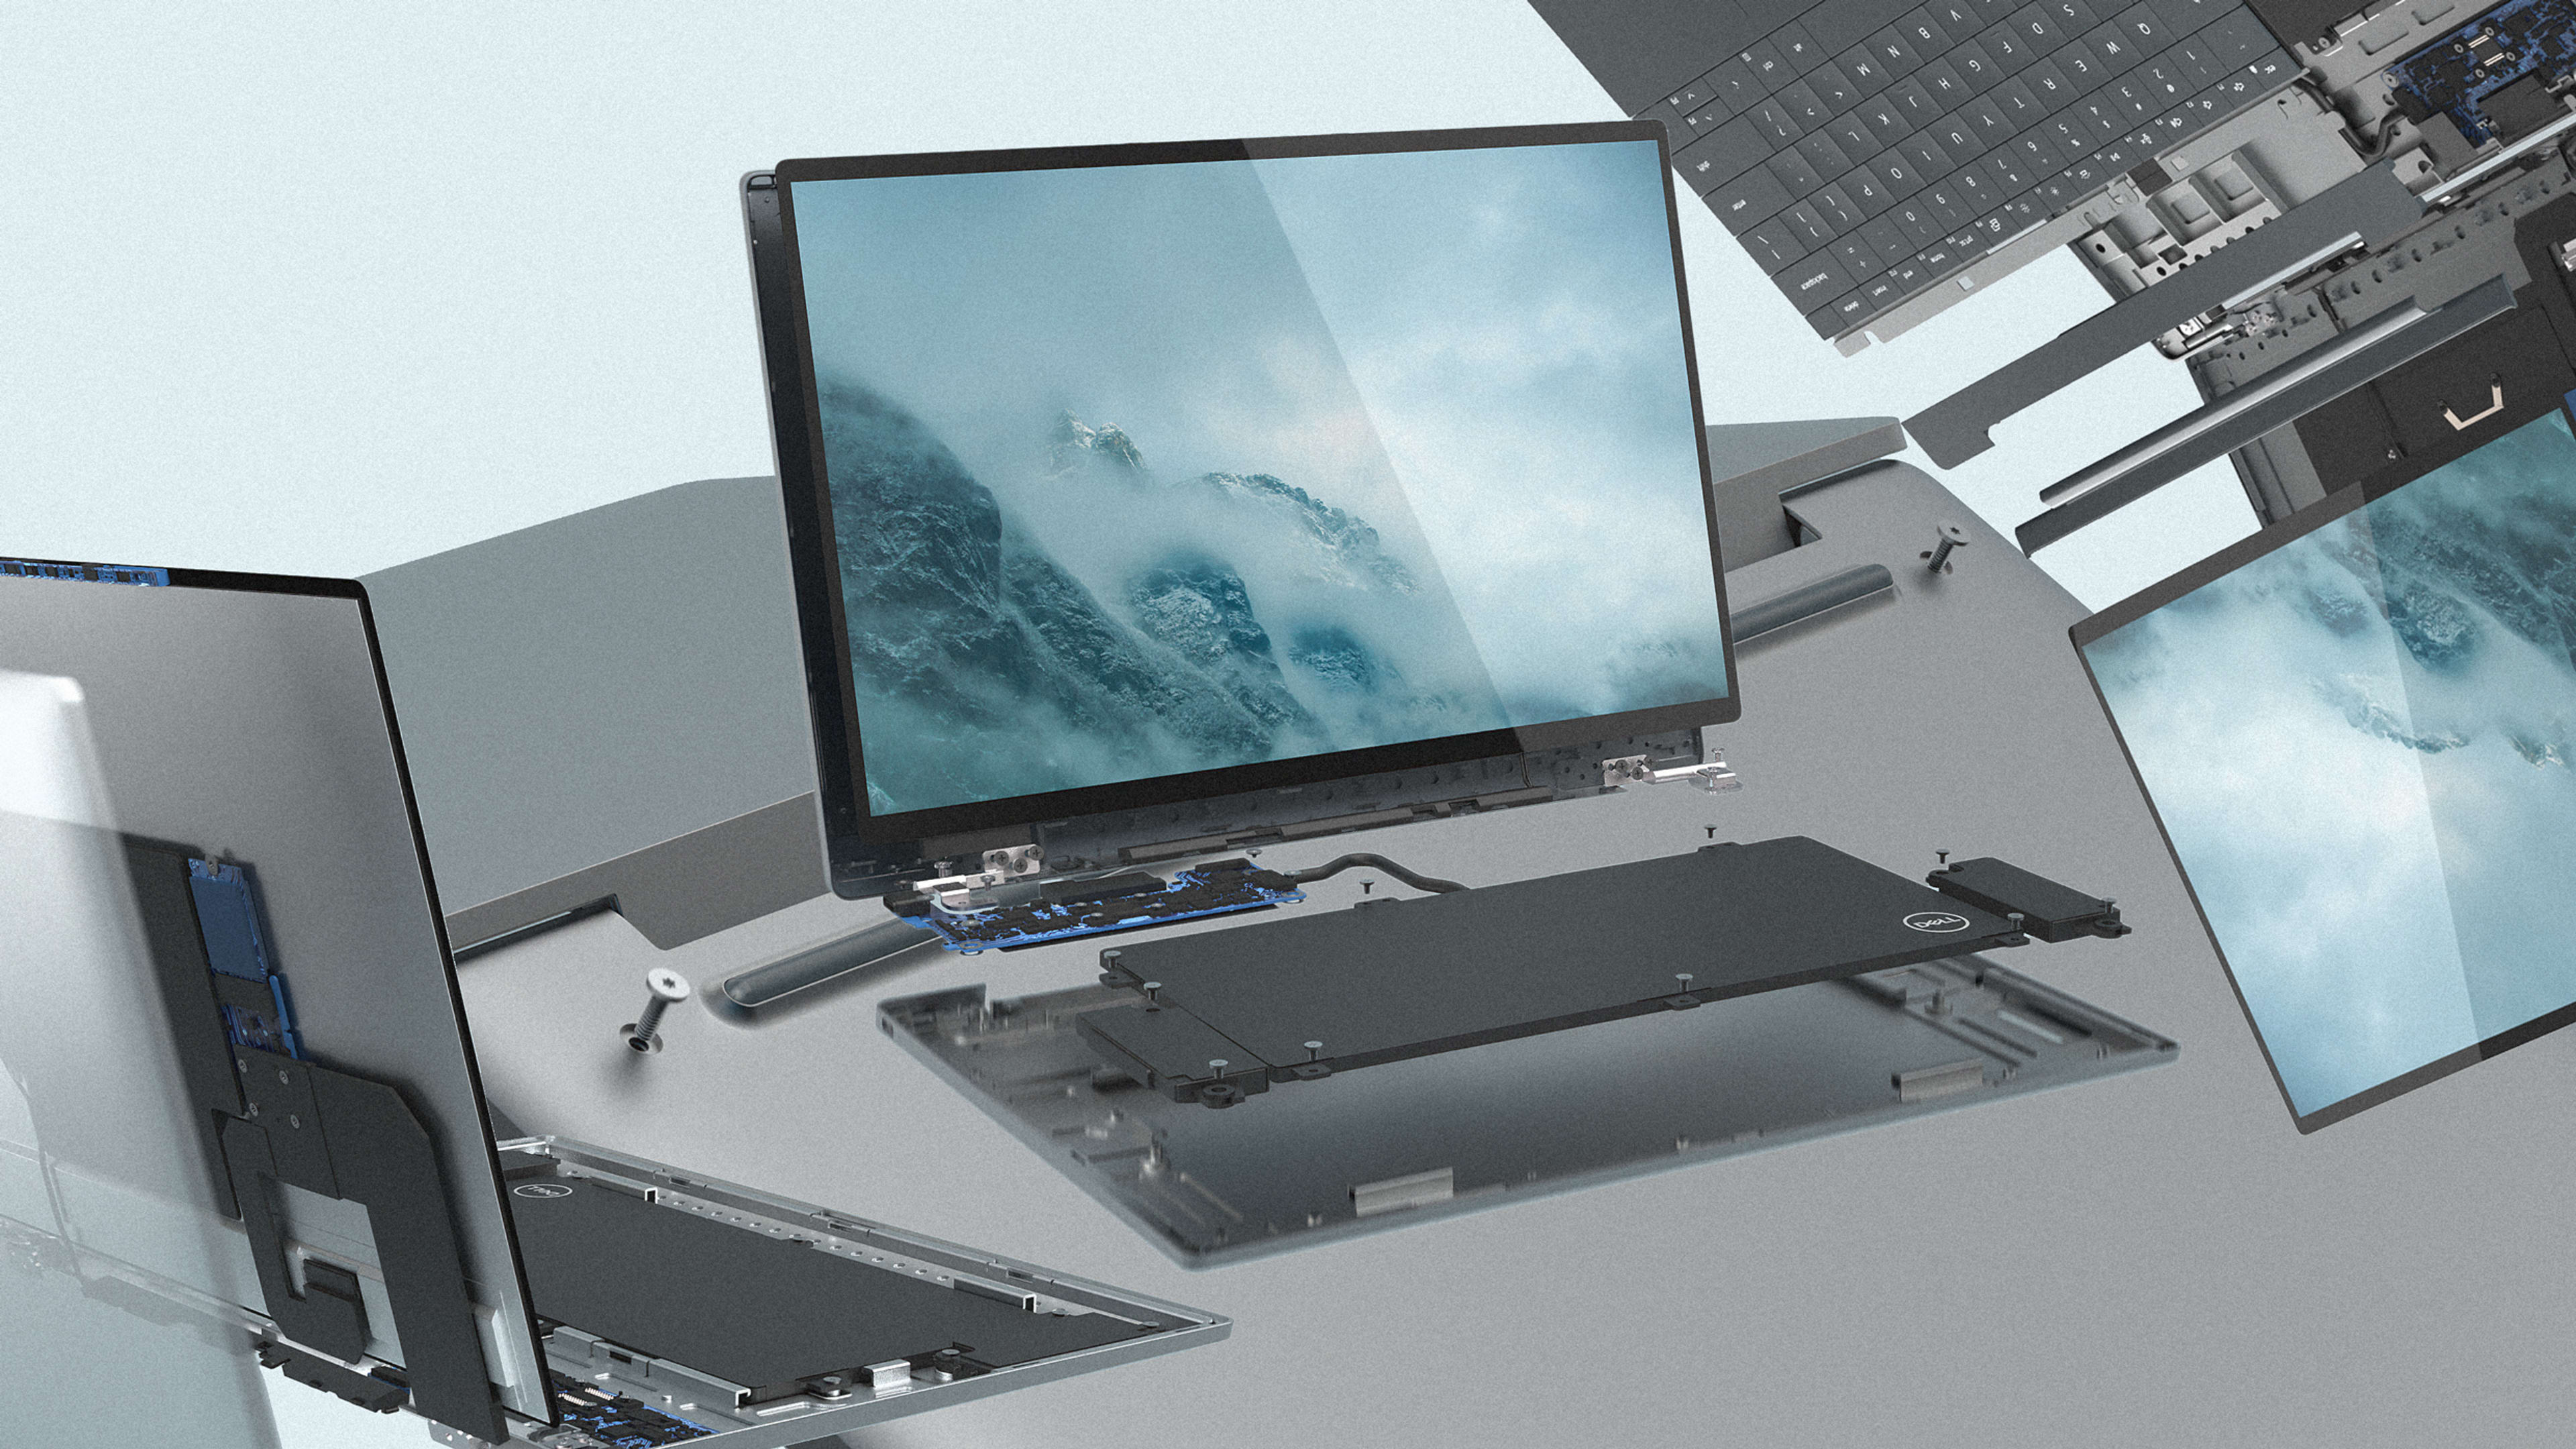 Dell’s new prototype laptop shows how easy it could be to repair and recycle electronics